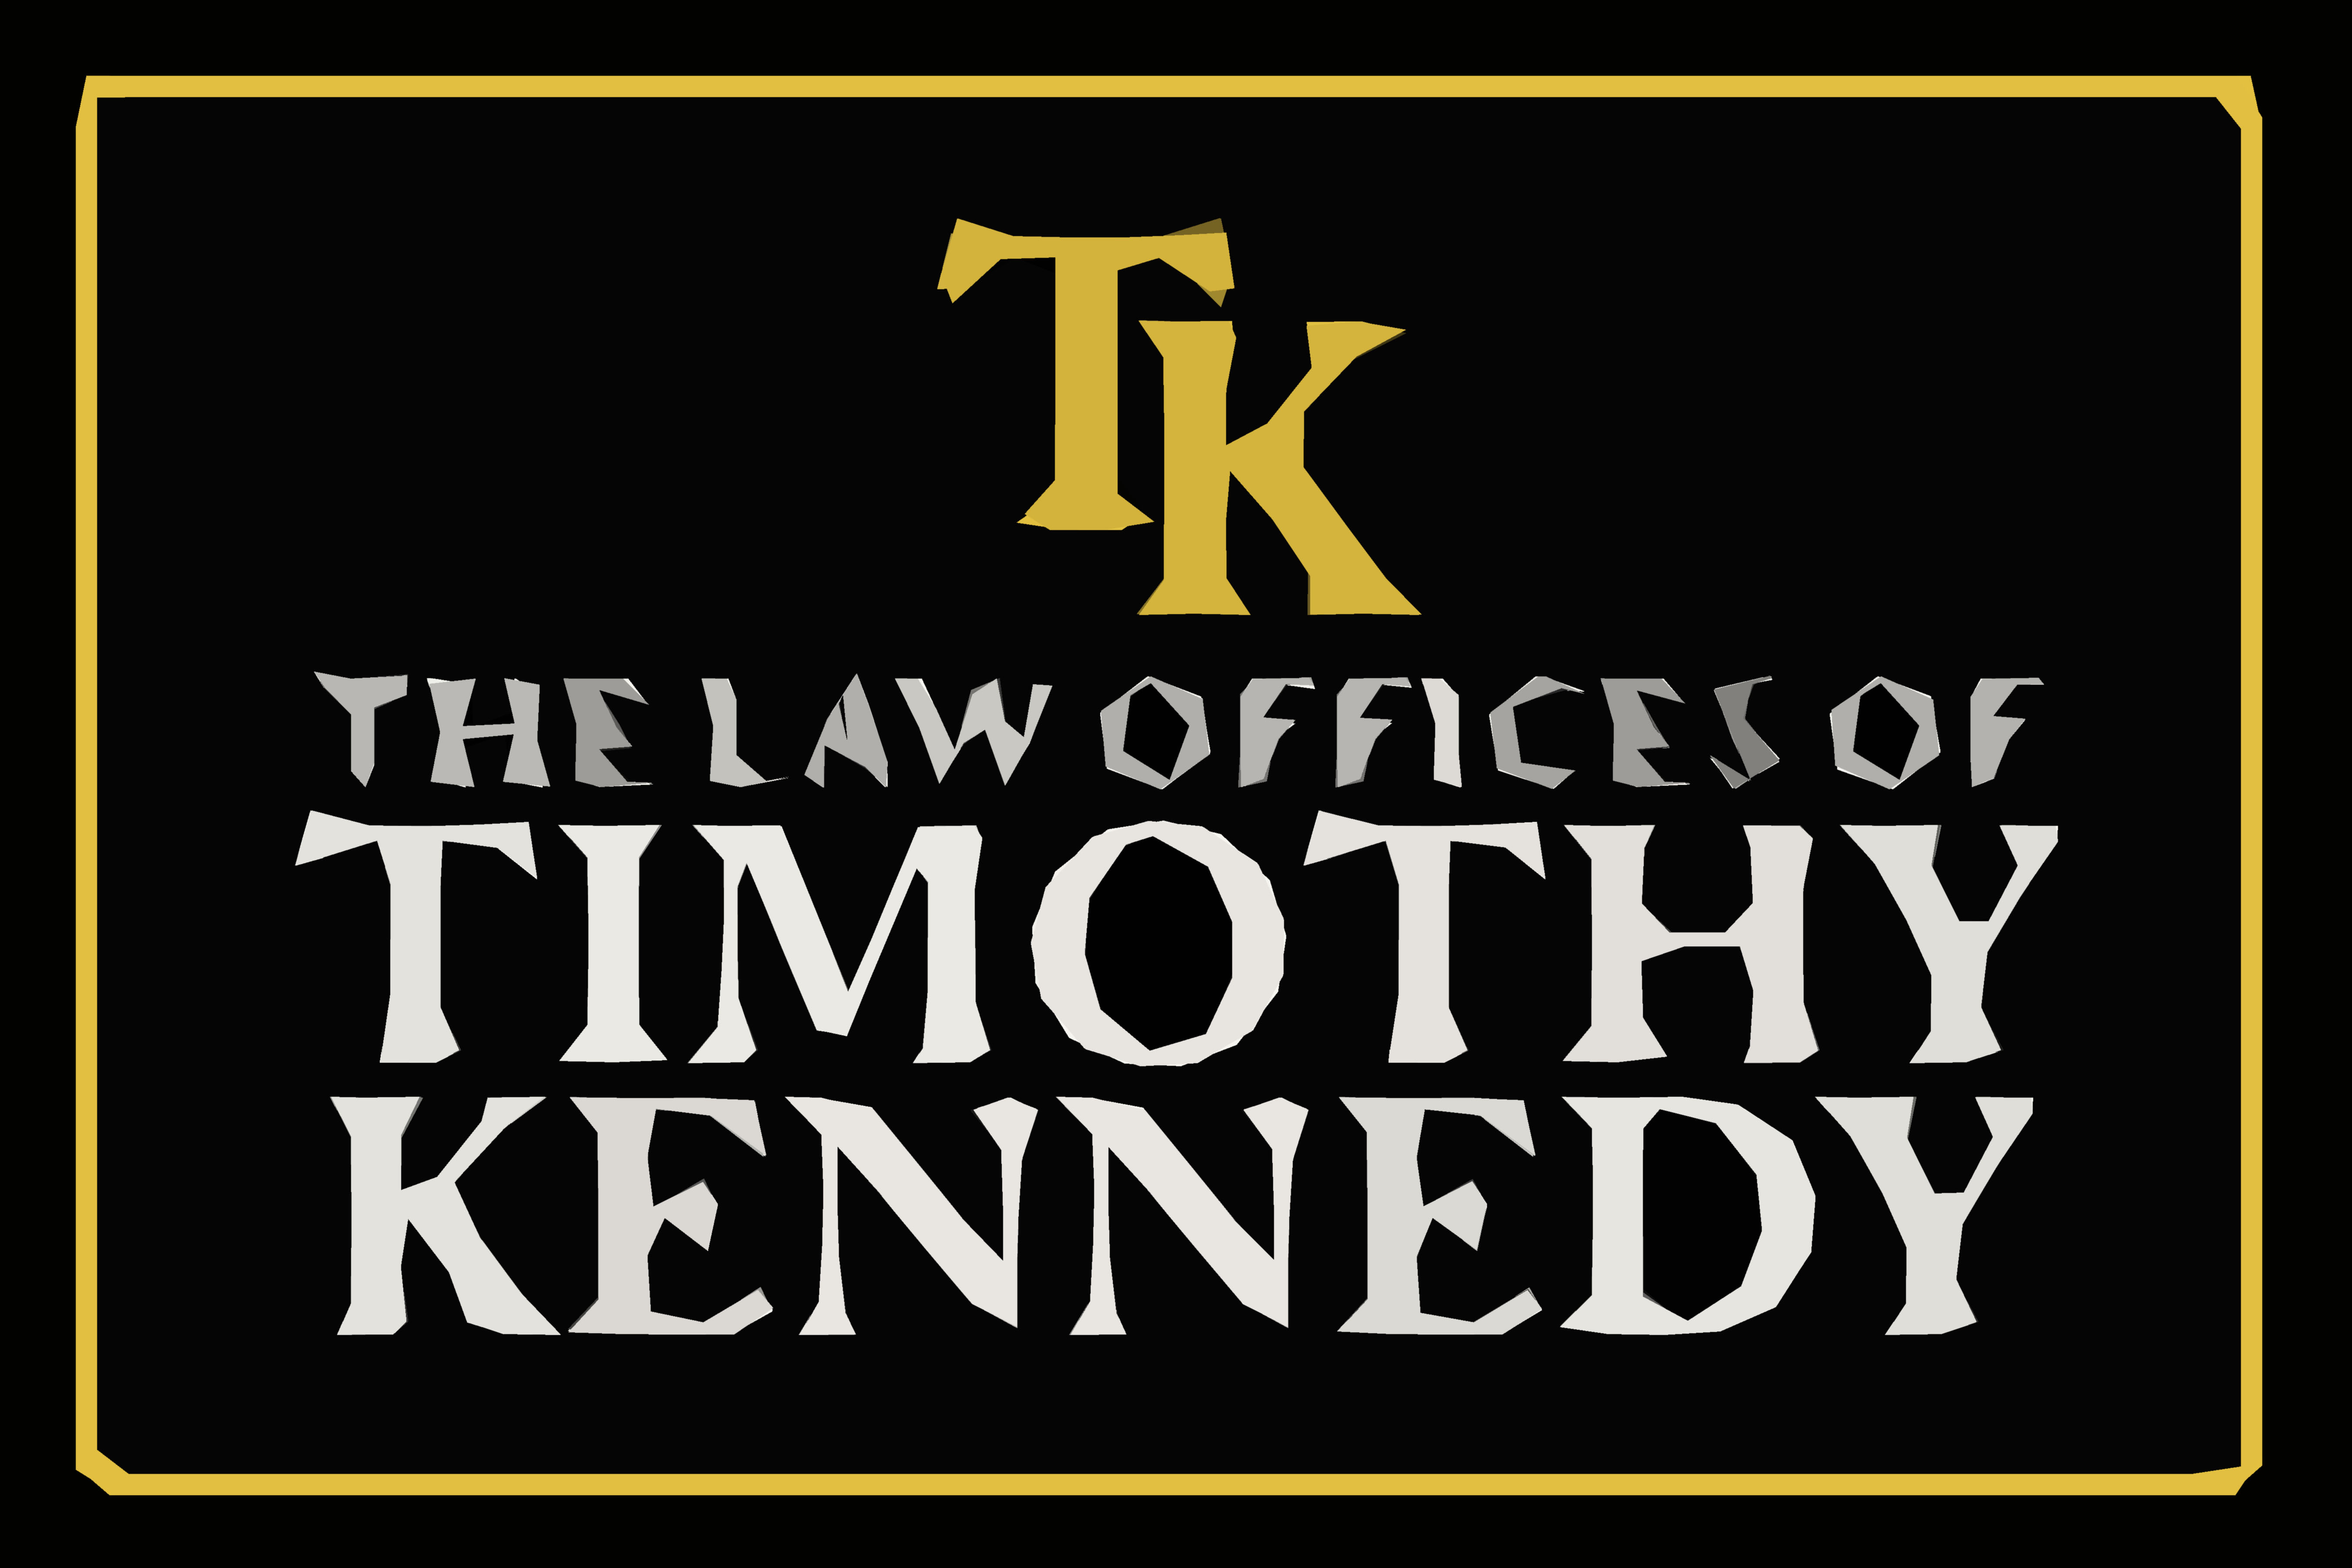 Law Offices of Timothy Kennedy - cut out logo